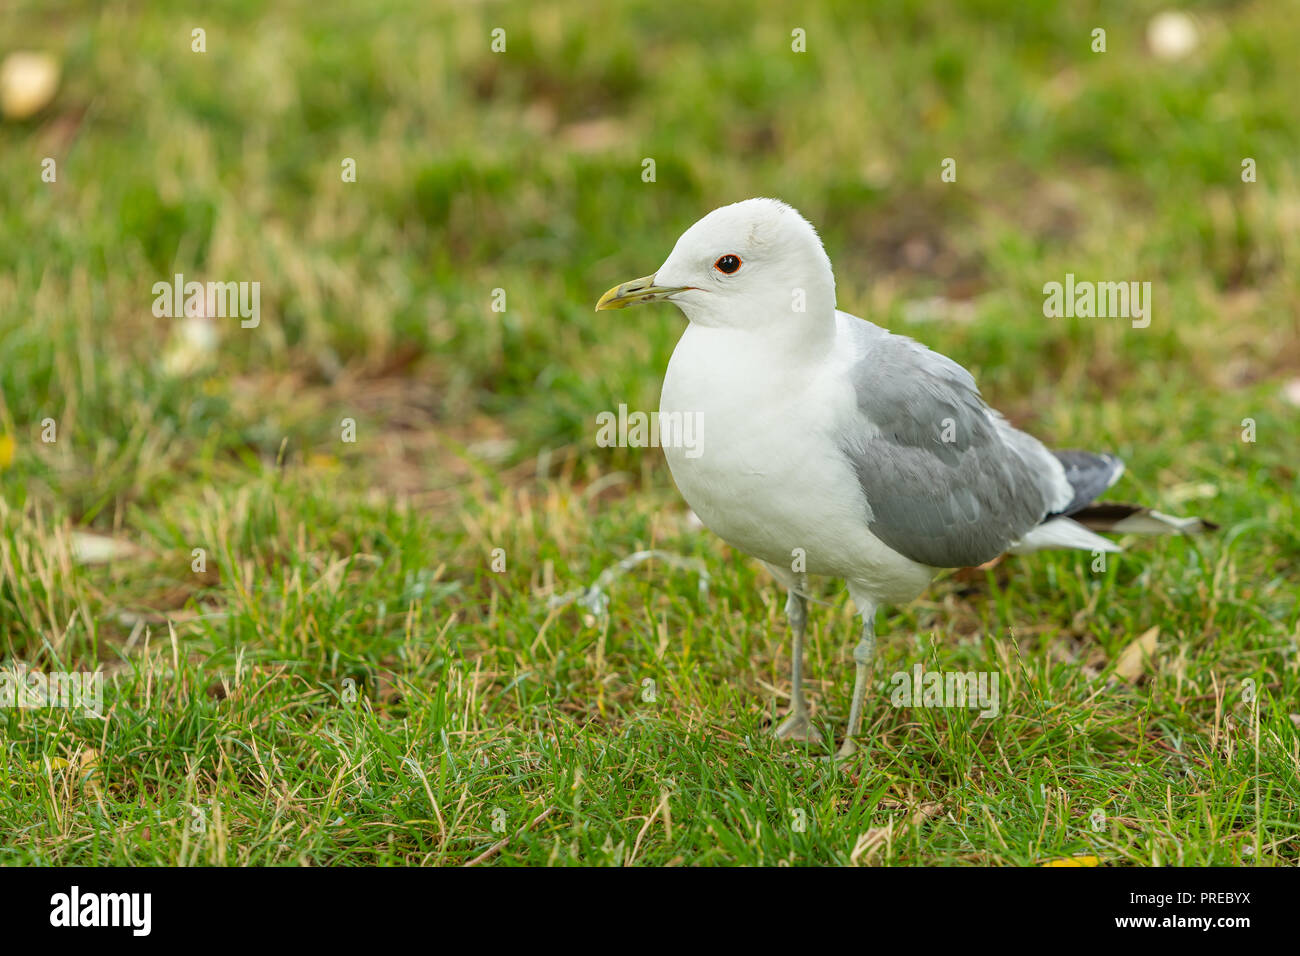 The common gull (mew gull) is a medium-sized gull that breeds in northern Asia, northern Europe, and northwestern North America. Stock Photo